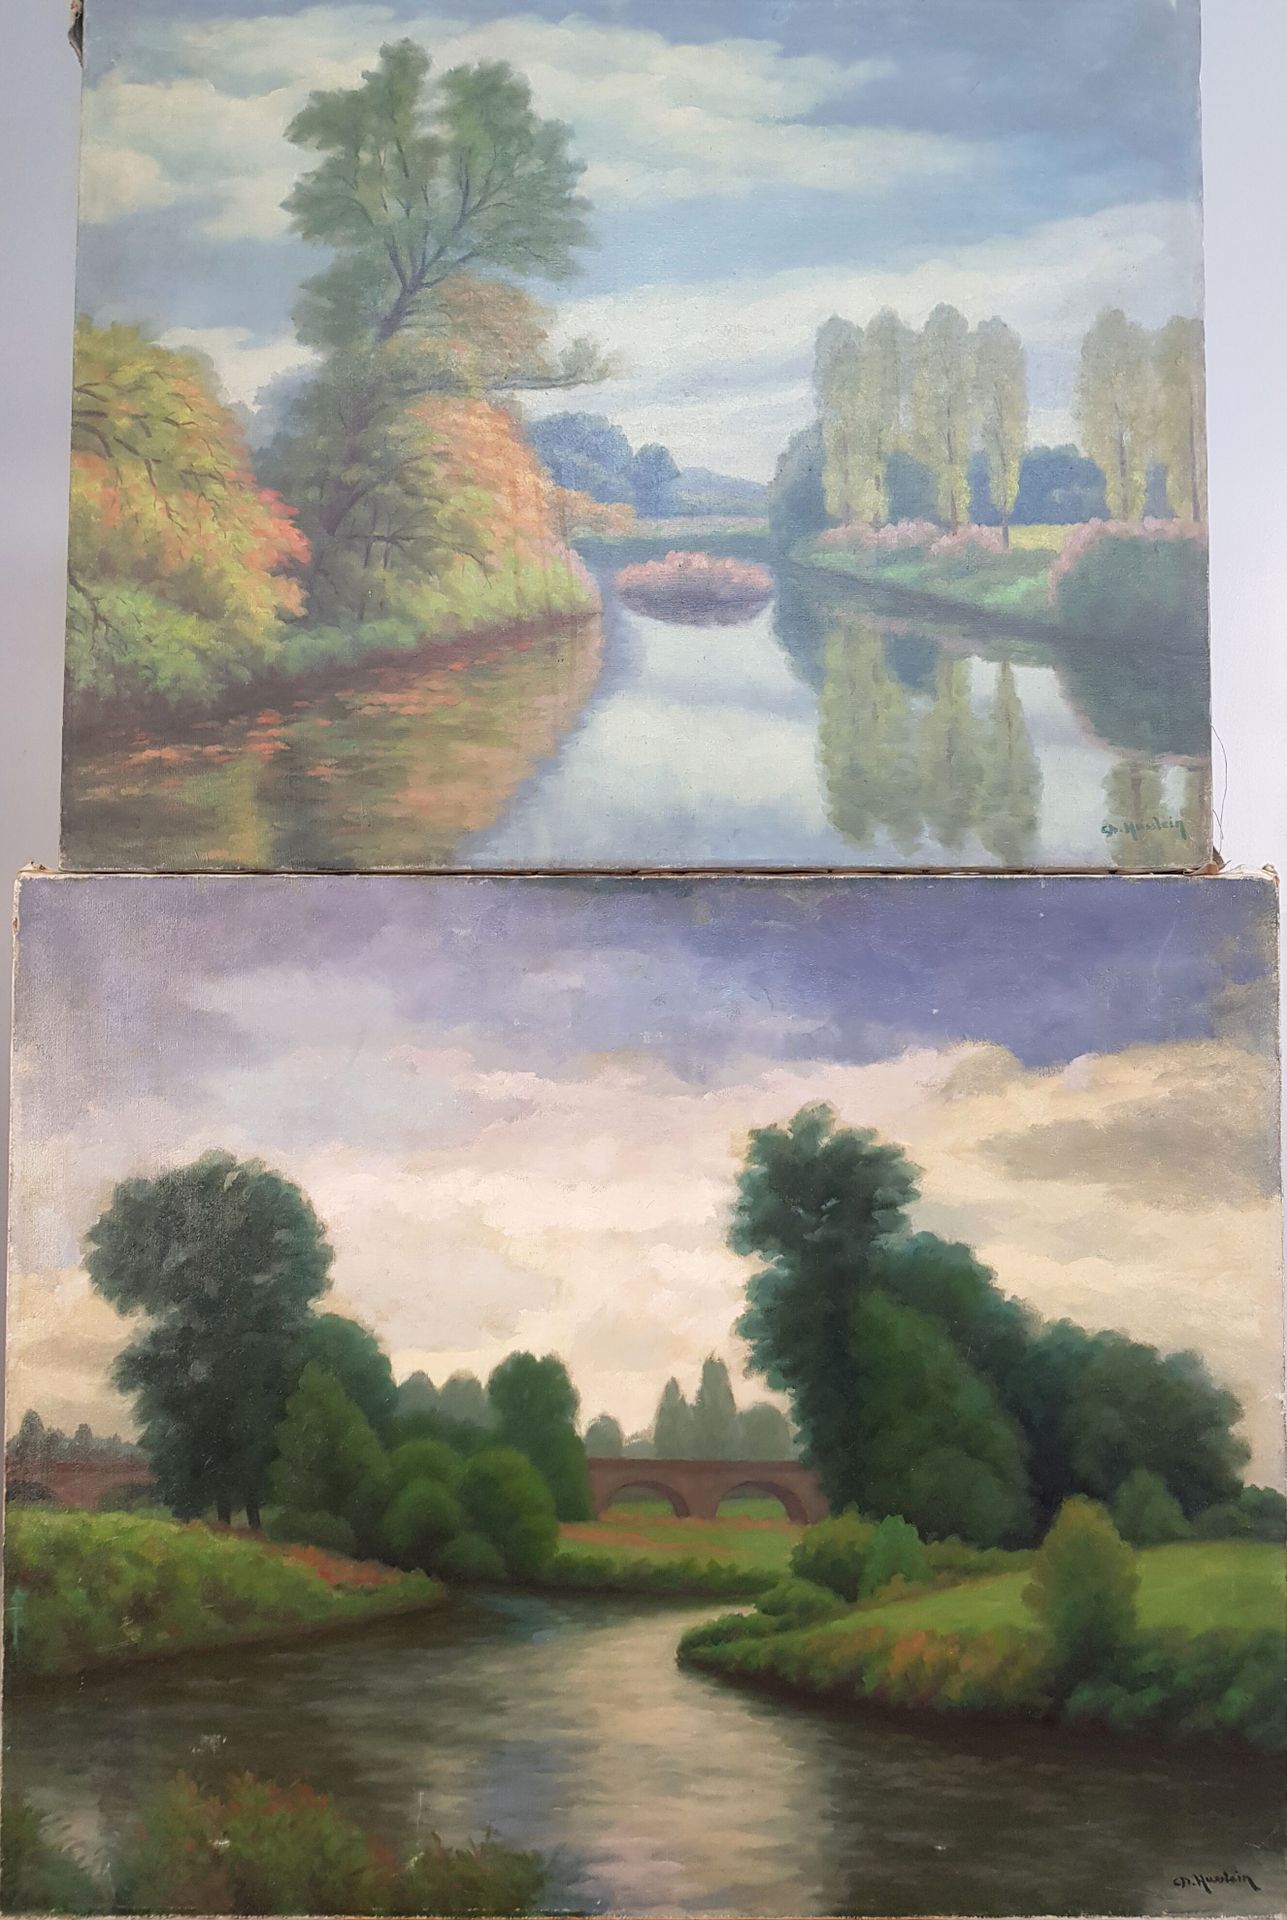 DEUX OEUVRES formant pendant : 
- Charles HUSSLEIN (1894-1971) 
"Paysage du Ried&hellip;